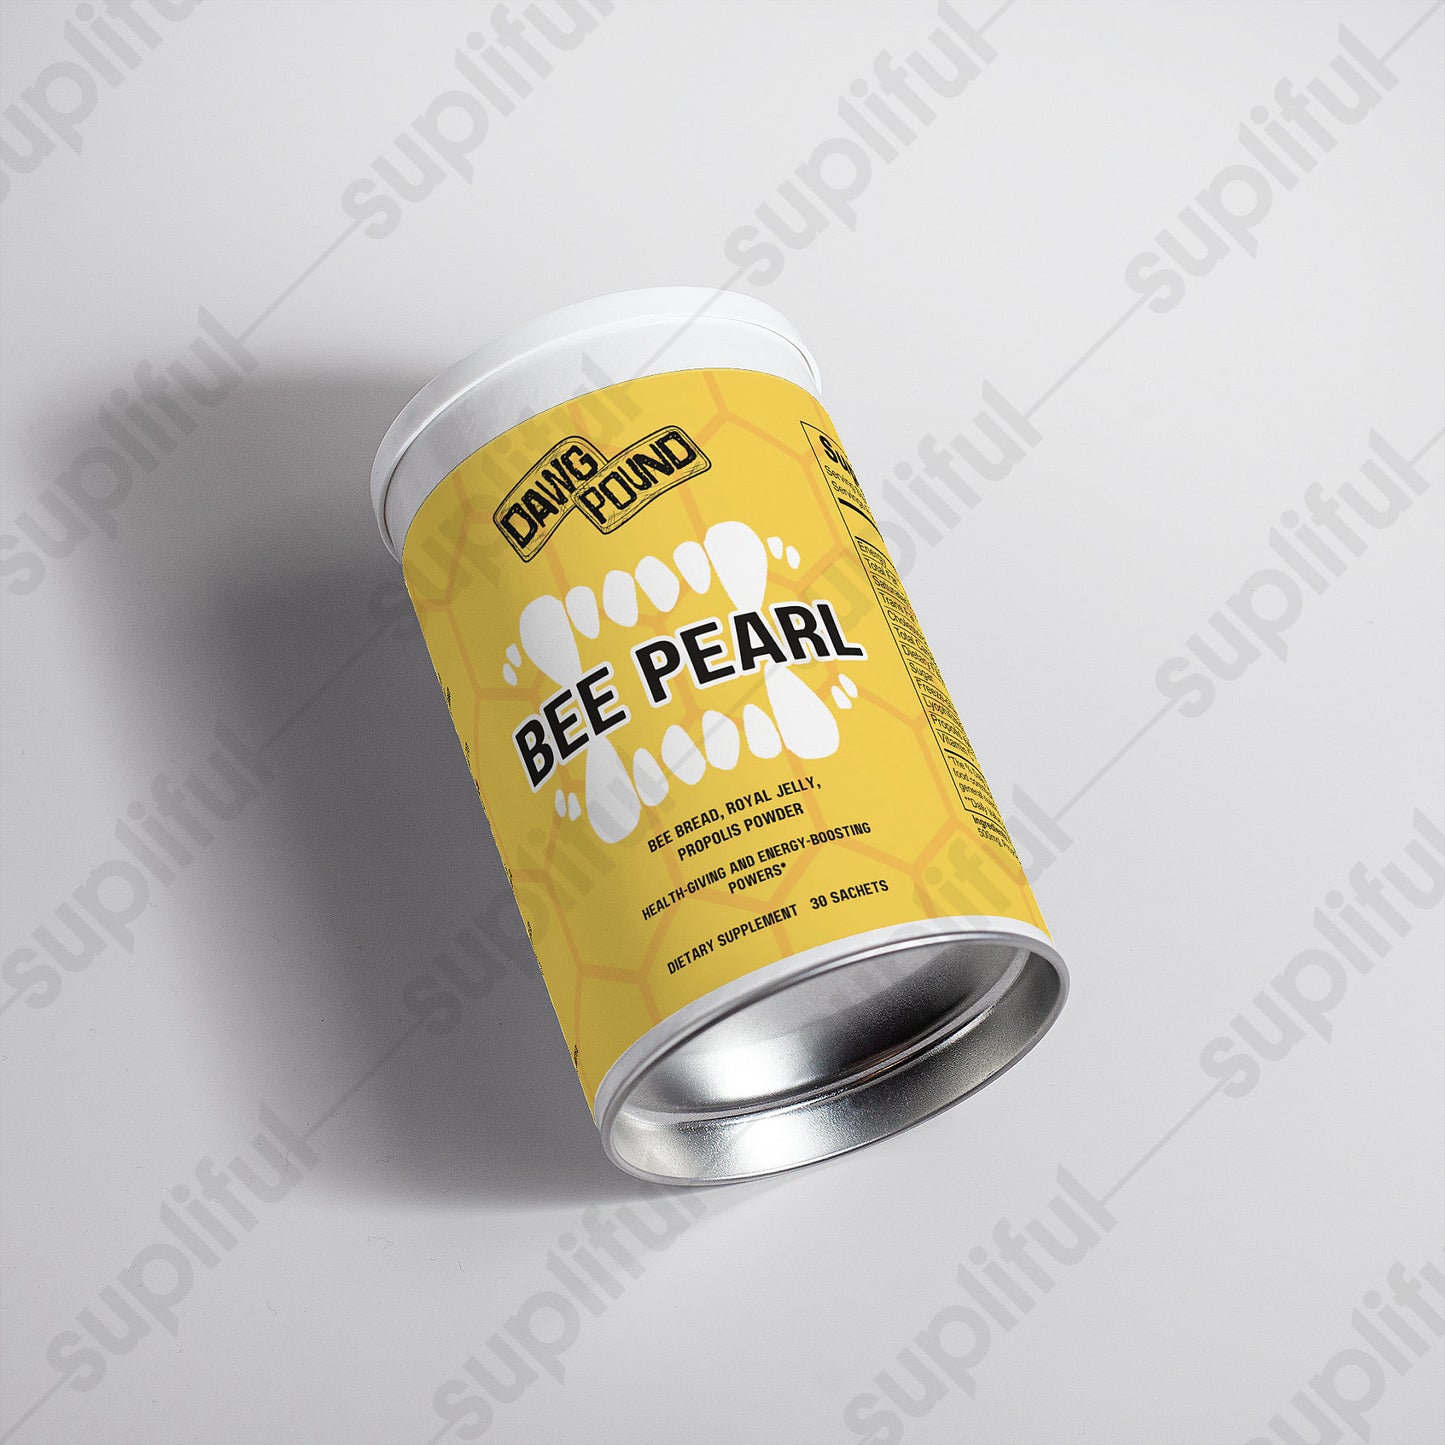 Dawg Pound Bee Pearl Powder - Alternate Front View 